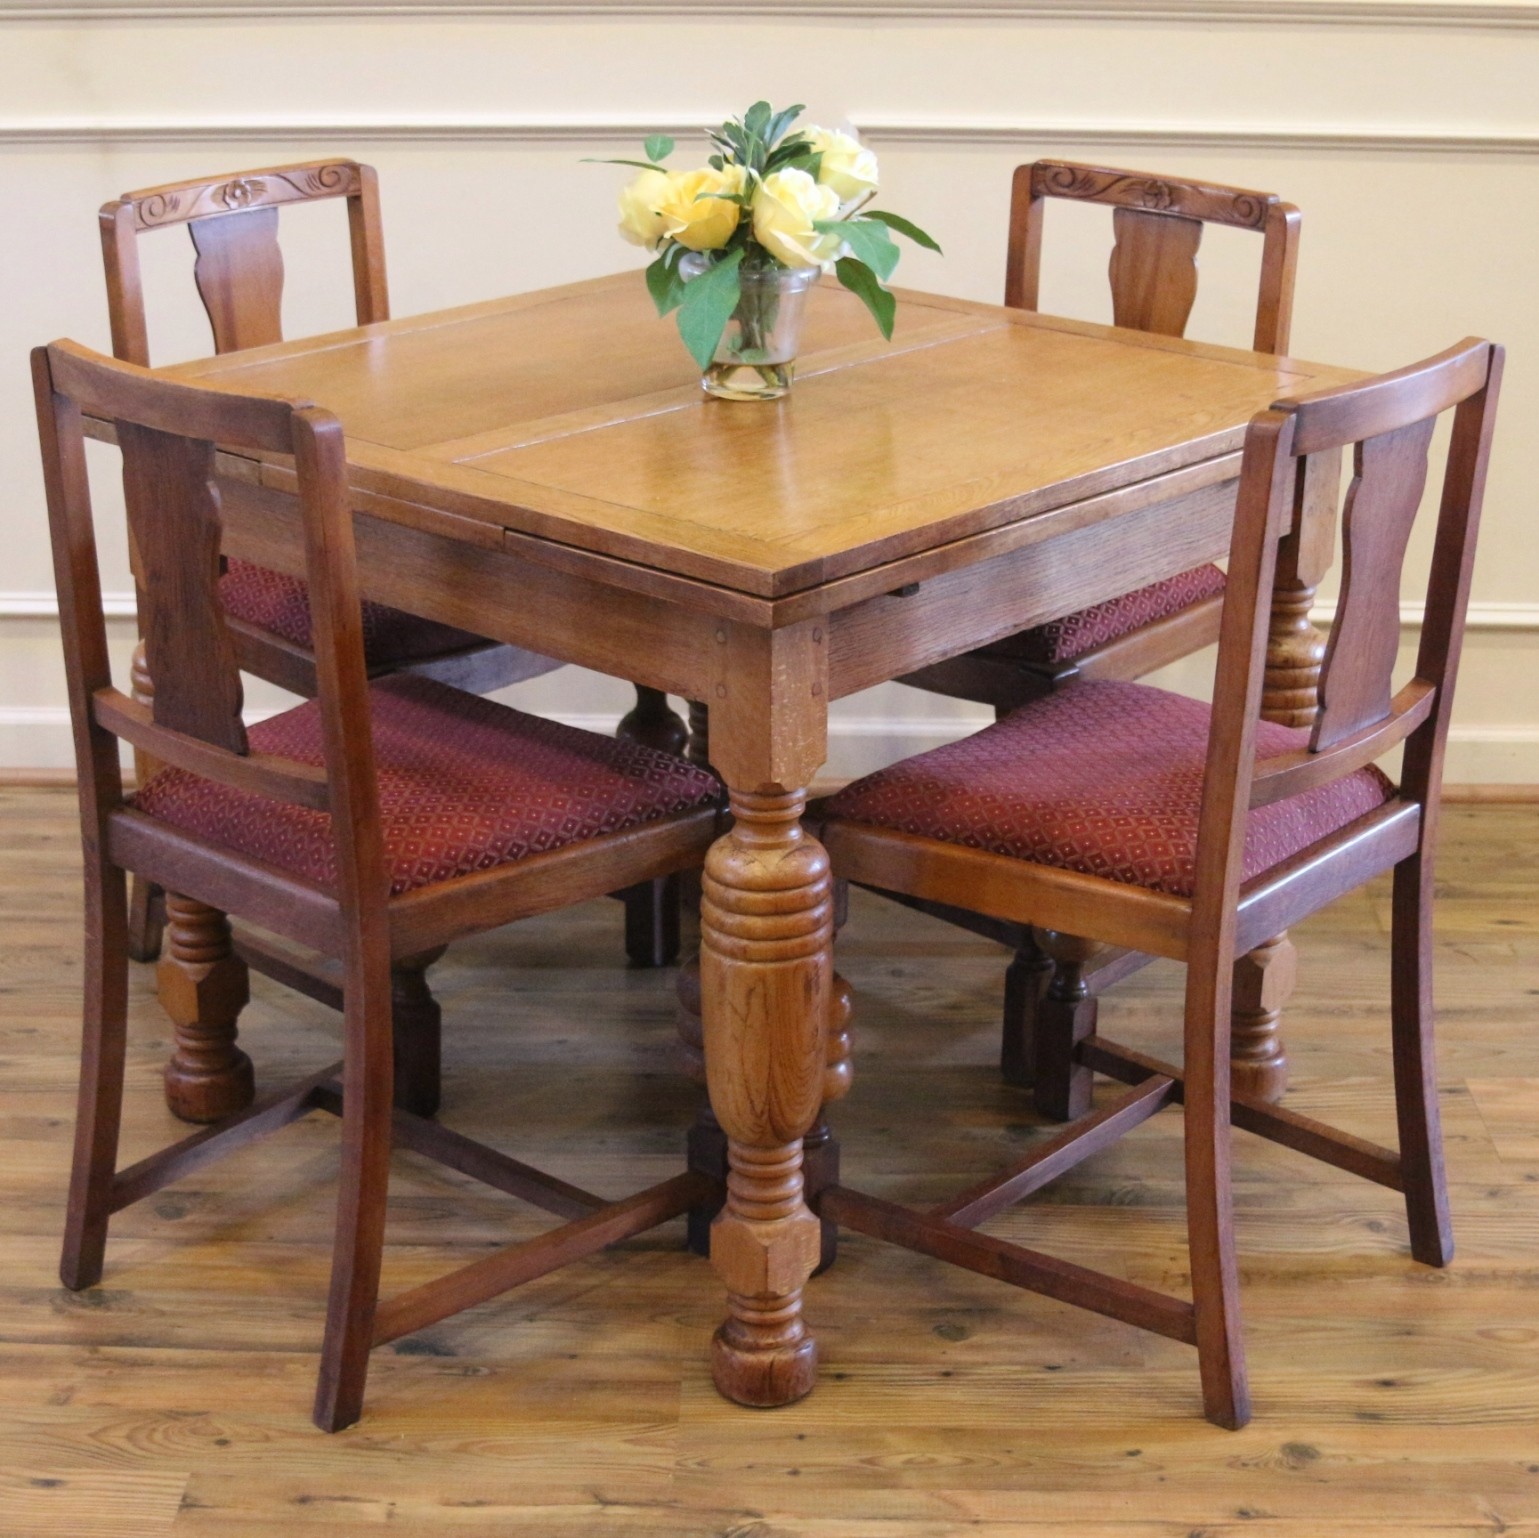 Antique english oak pub table and 4 chairs dining set